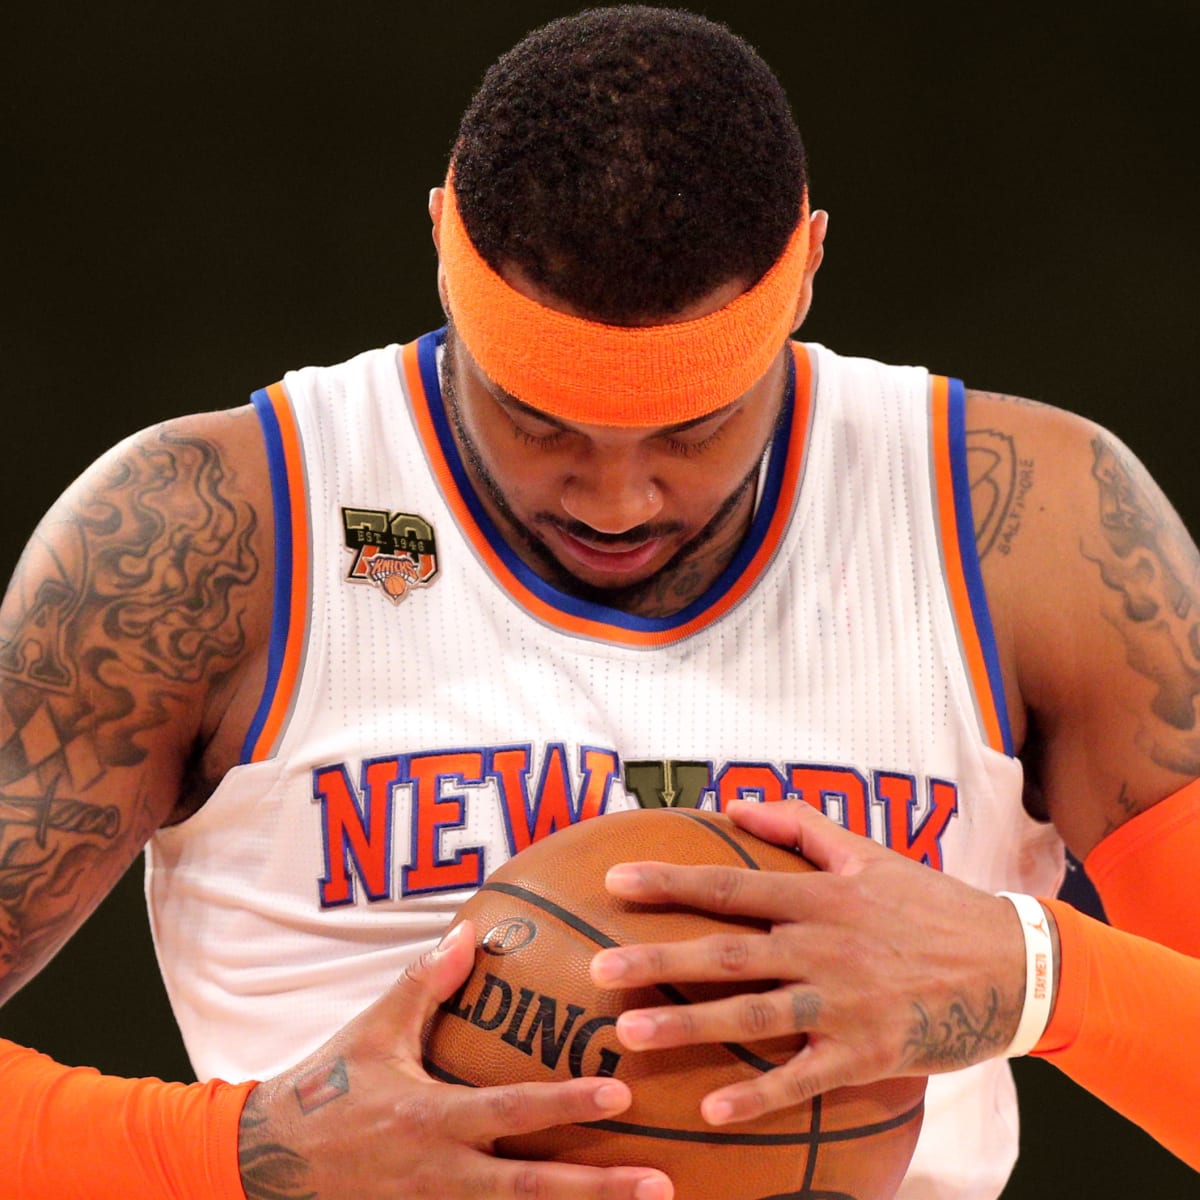 New York Knicks: What Is Carmelo Anthony's Future?